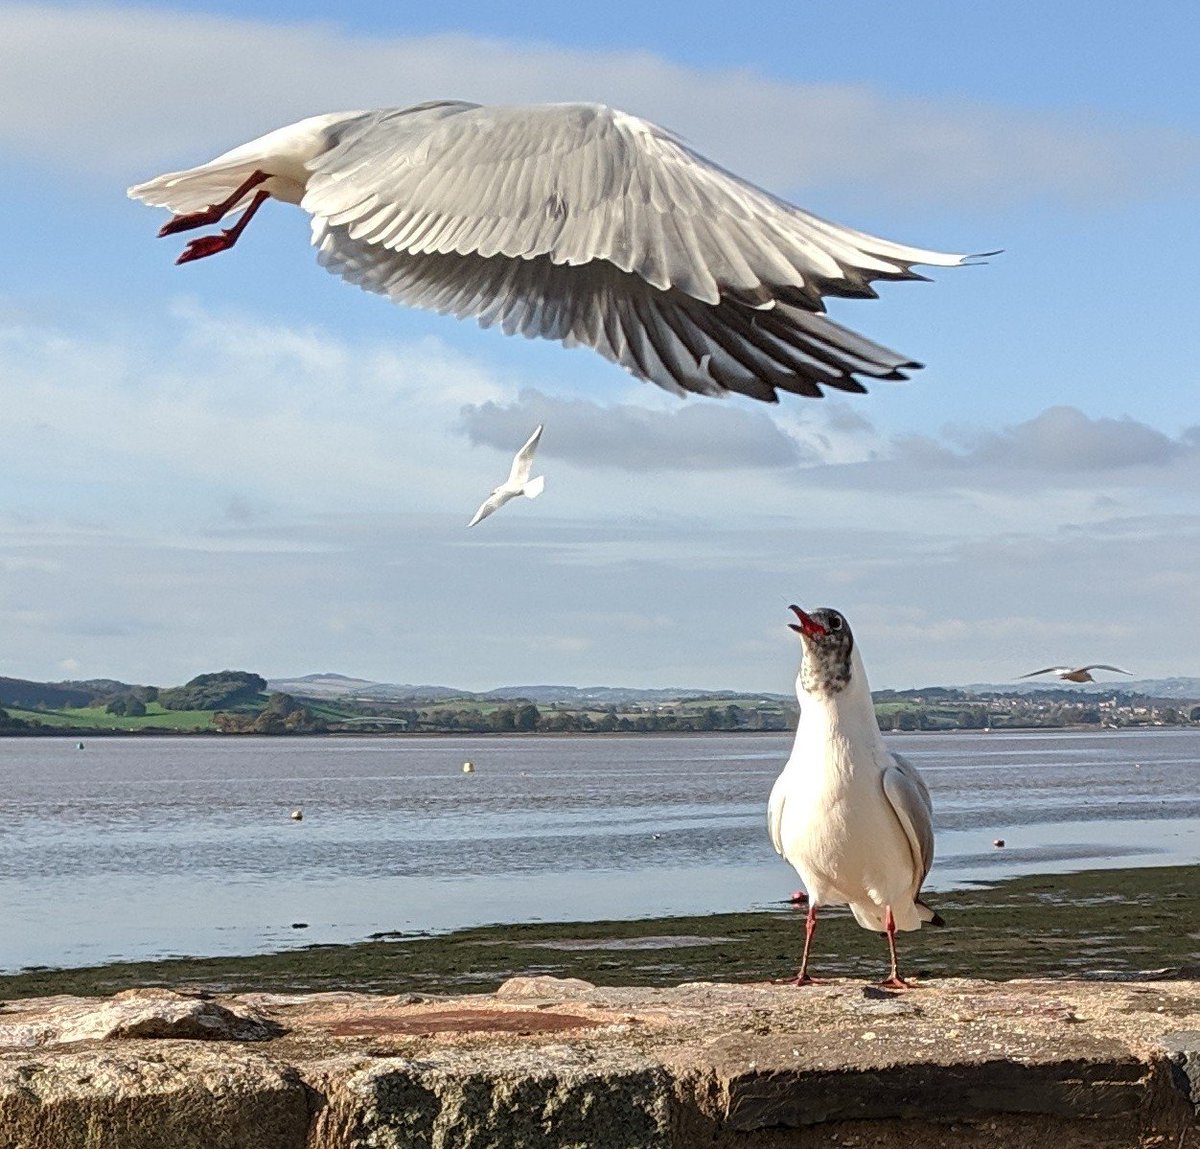 I took this at Lympstone in Devon. You've got to admire wings. #MyBirdPic